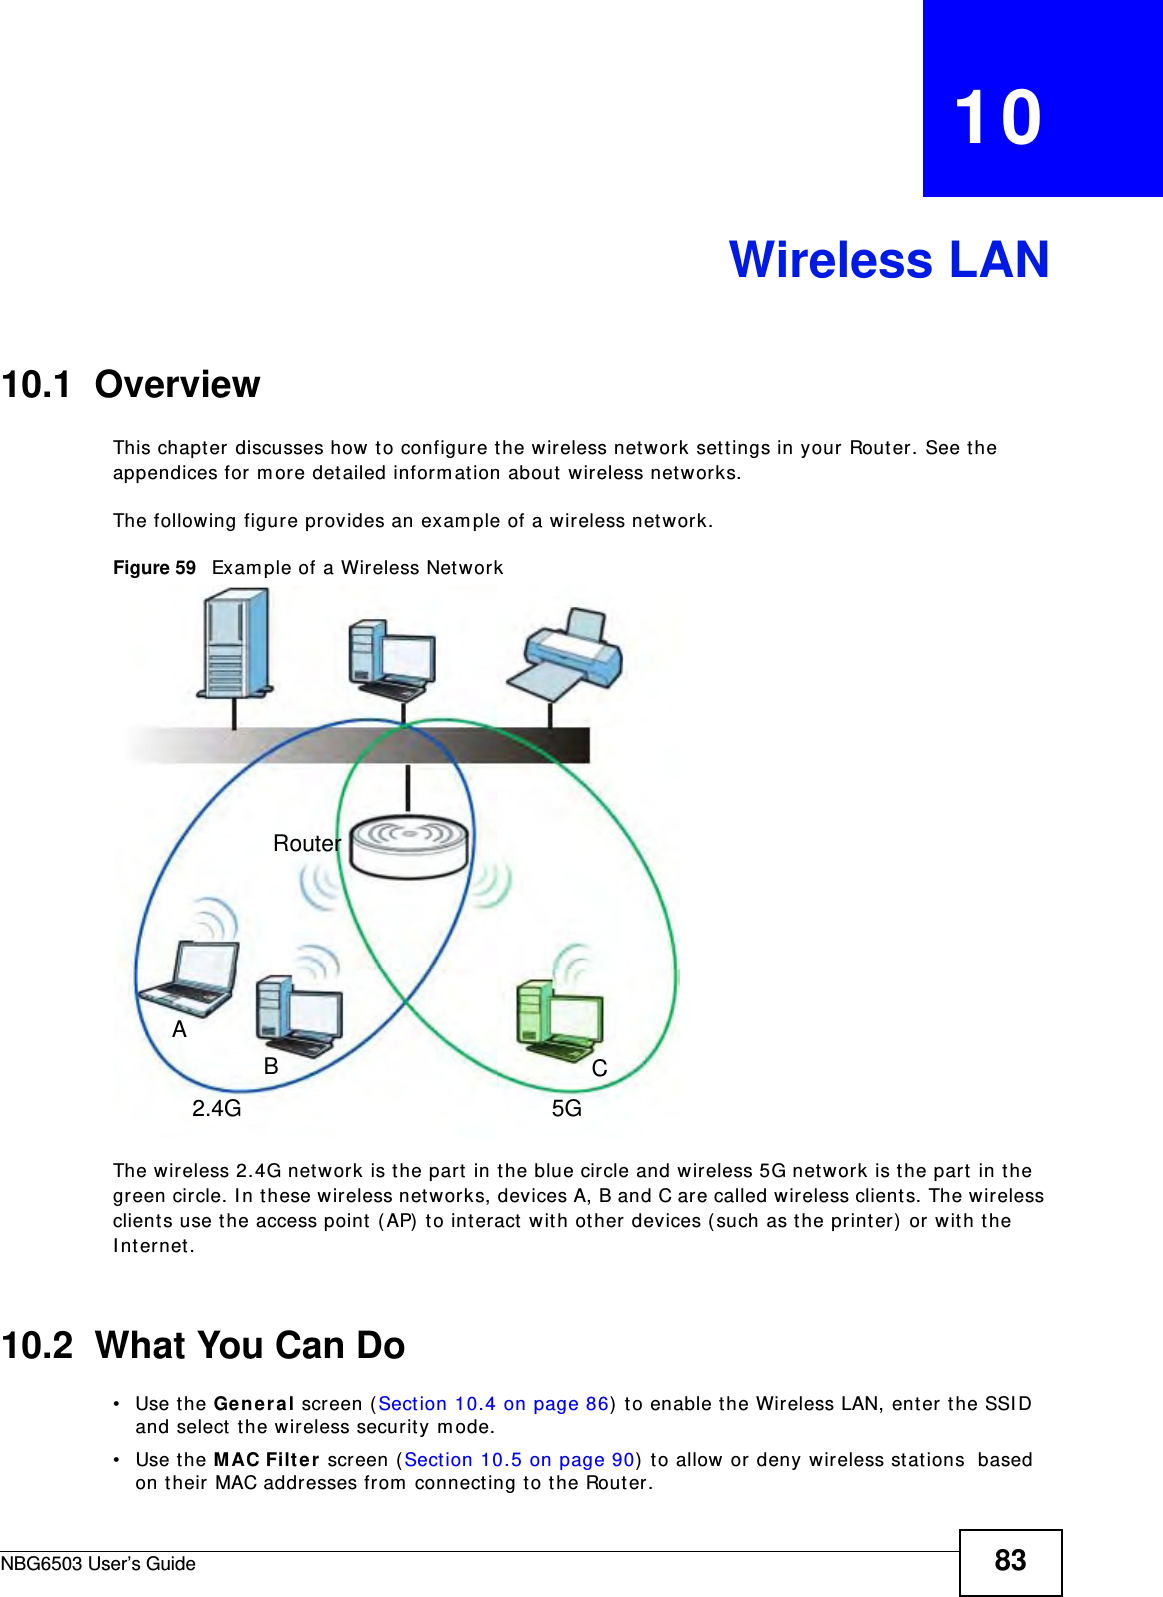 NBG6503 User’s Guide 83CHAPTER   10Wireless LAN10.1  OverviewThis chapter discusses how to configure the wireless network settings in your Router. See the appendices for more detailed information about wireless networks.The following figure provides an example of a wireless network.Figure 59   Example of a Wireless NetworkThe wireless 2.4G network is the part in the blue circle and wireless 5G network is the part in the green circle. In these wireless networks, devices A, B and C are called wireless clients. The wireless clients use the access point (AP) to interact with other devices (such as the printer) or with the Internet.10.2  What You Can Do•Use the General screen (Section 10.4 on page 86) to enable the Wireless LAN, enter the SSID and select the wireless security mode.•Use the MAC Filter screen (Section 10.5 on page 90) to allow or deny wireless stations  based on their MAC addresses from connecting to the Router.ABRouter2.4G 5GC